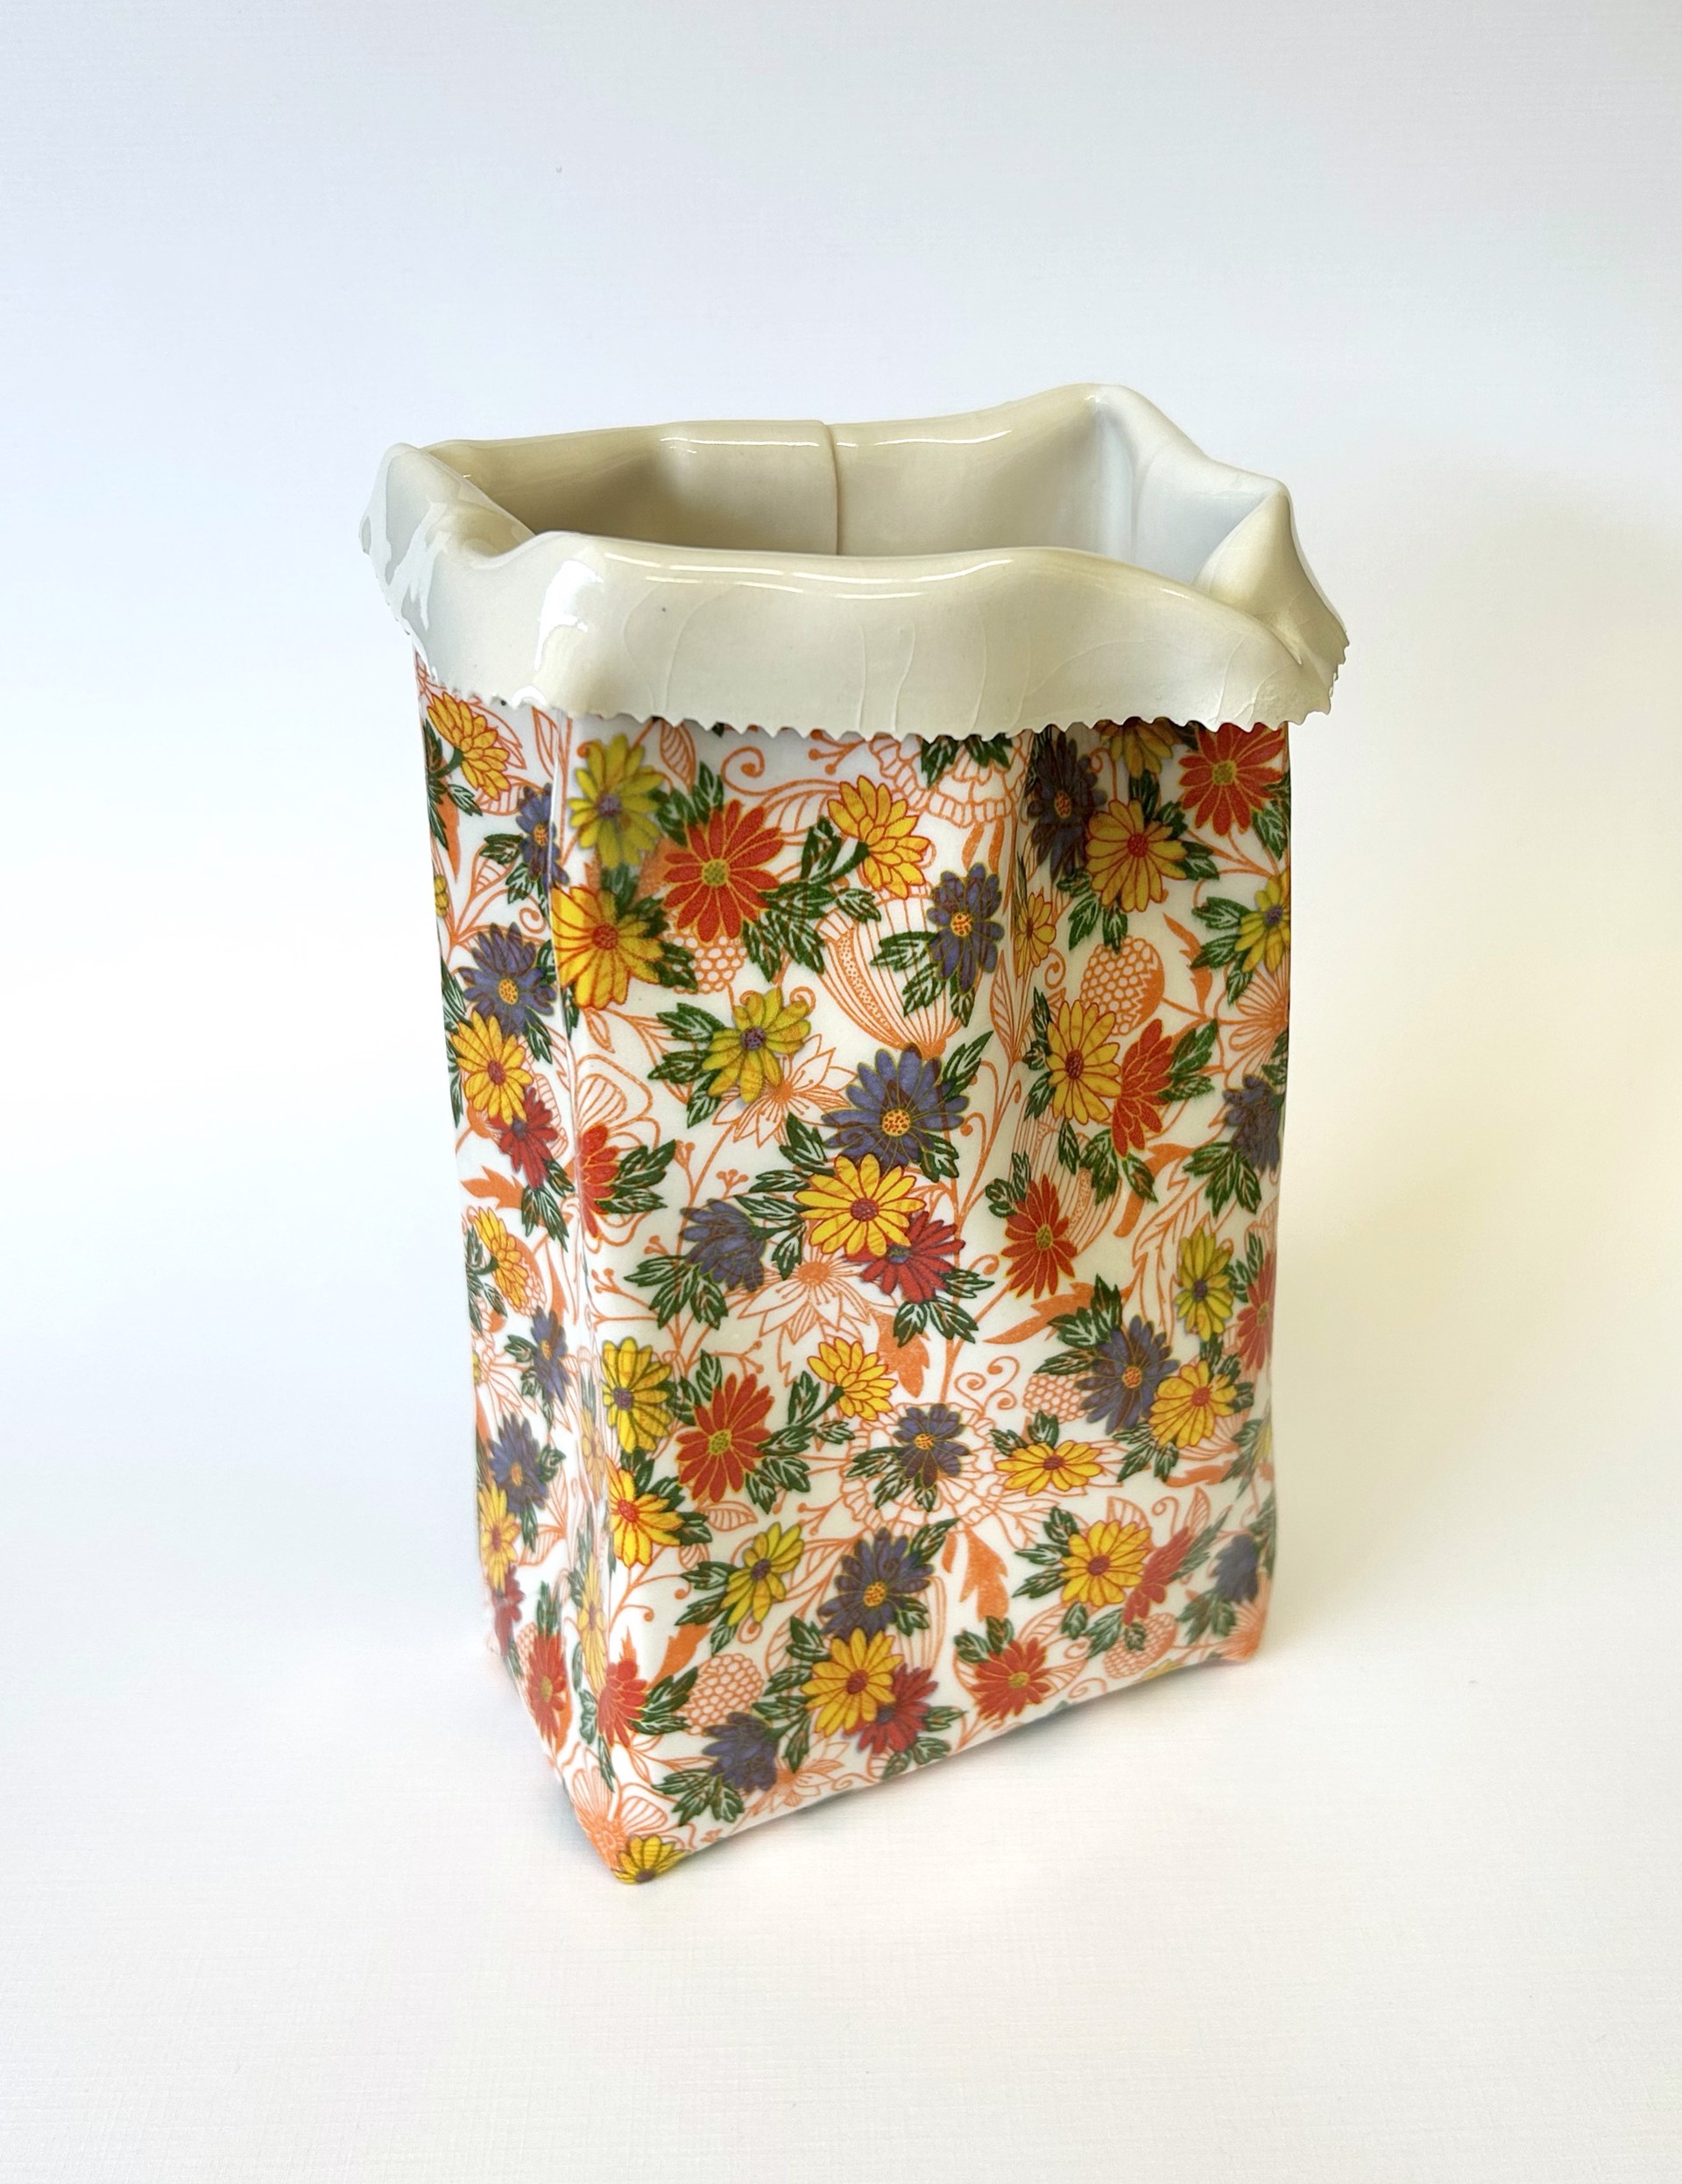 Folded Bag with Flowers by Chandra Beadleston